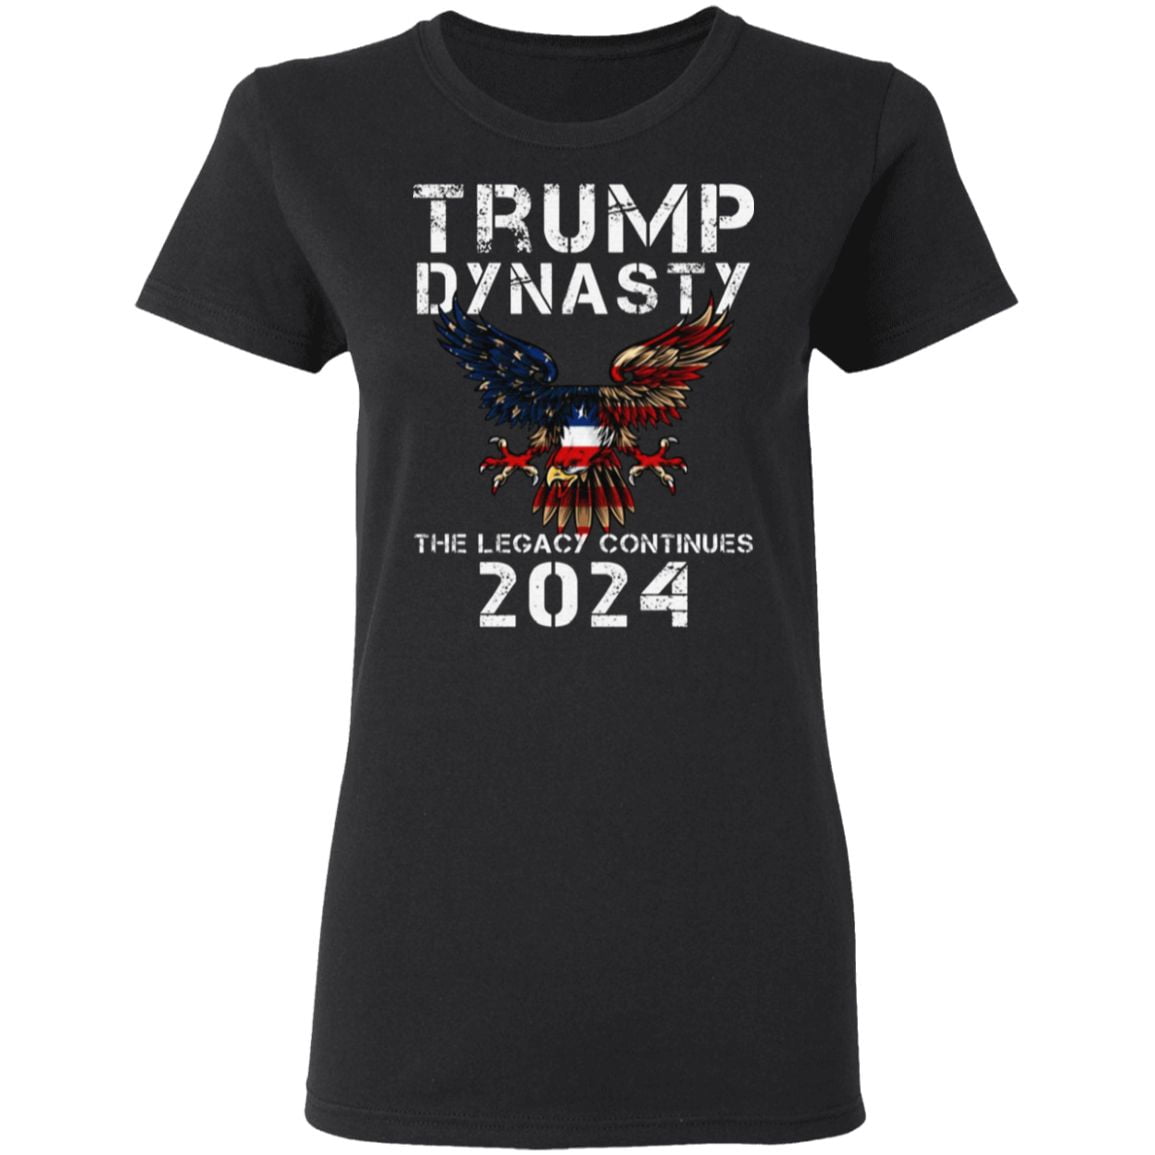 Trump Dynasty The Legacy Continues 2024 American Flag T-shirt